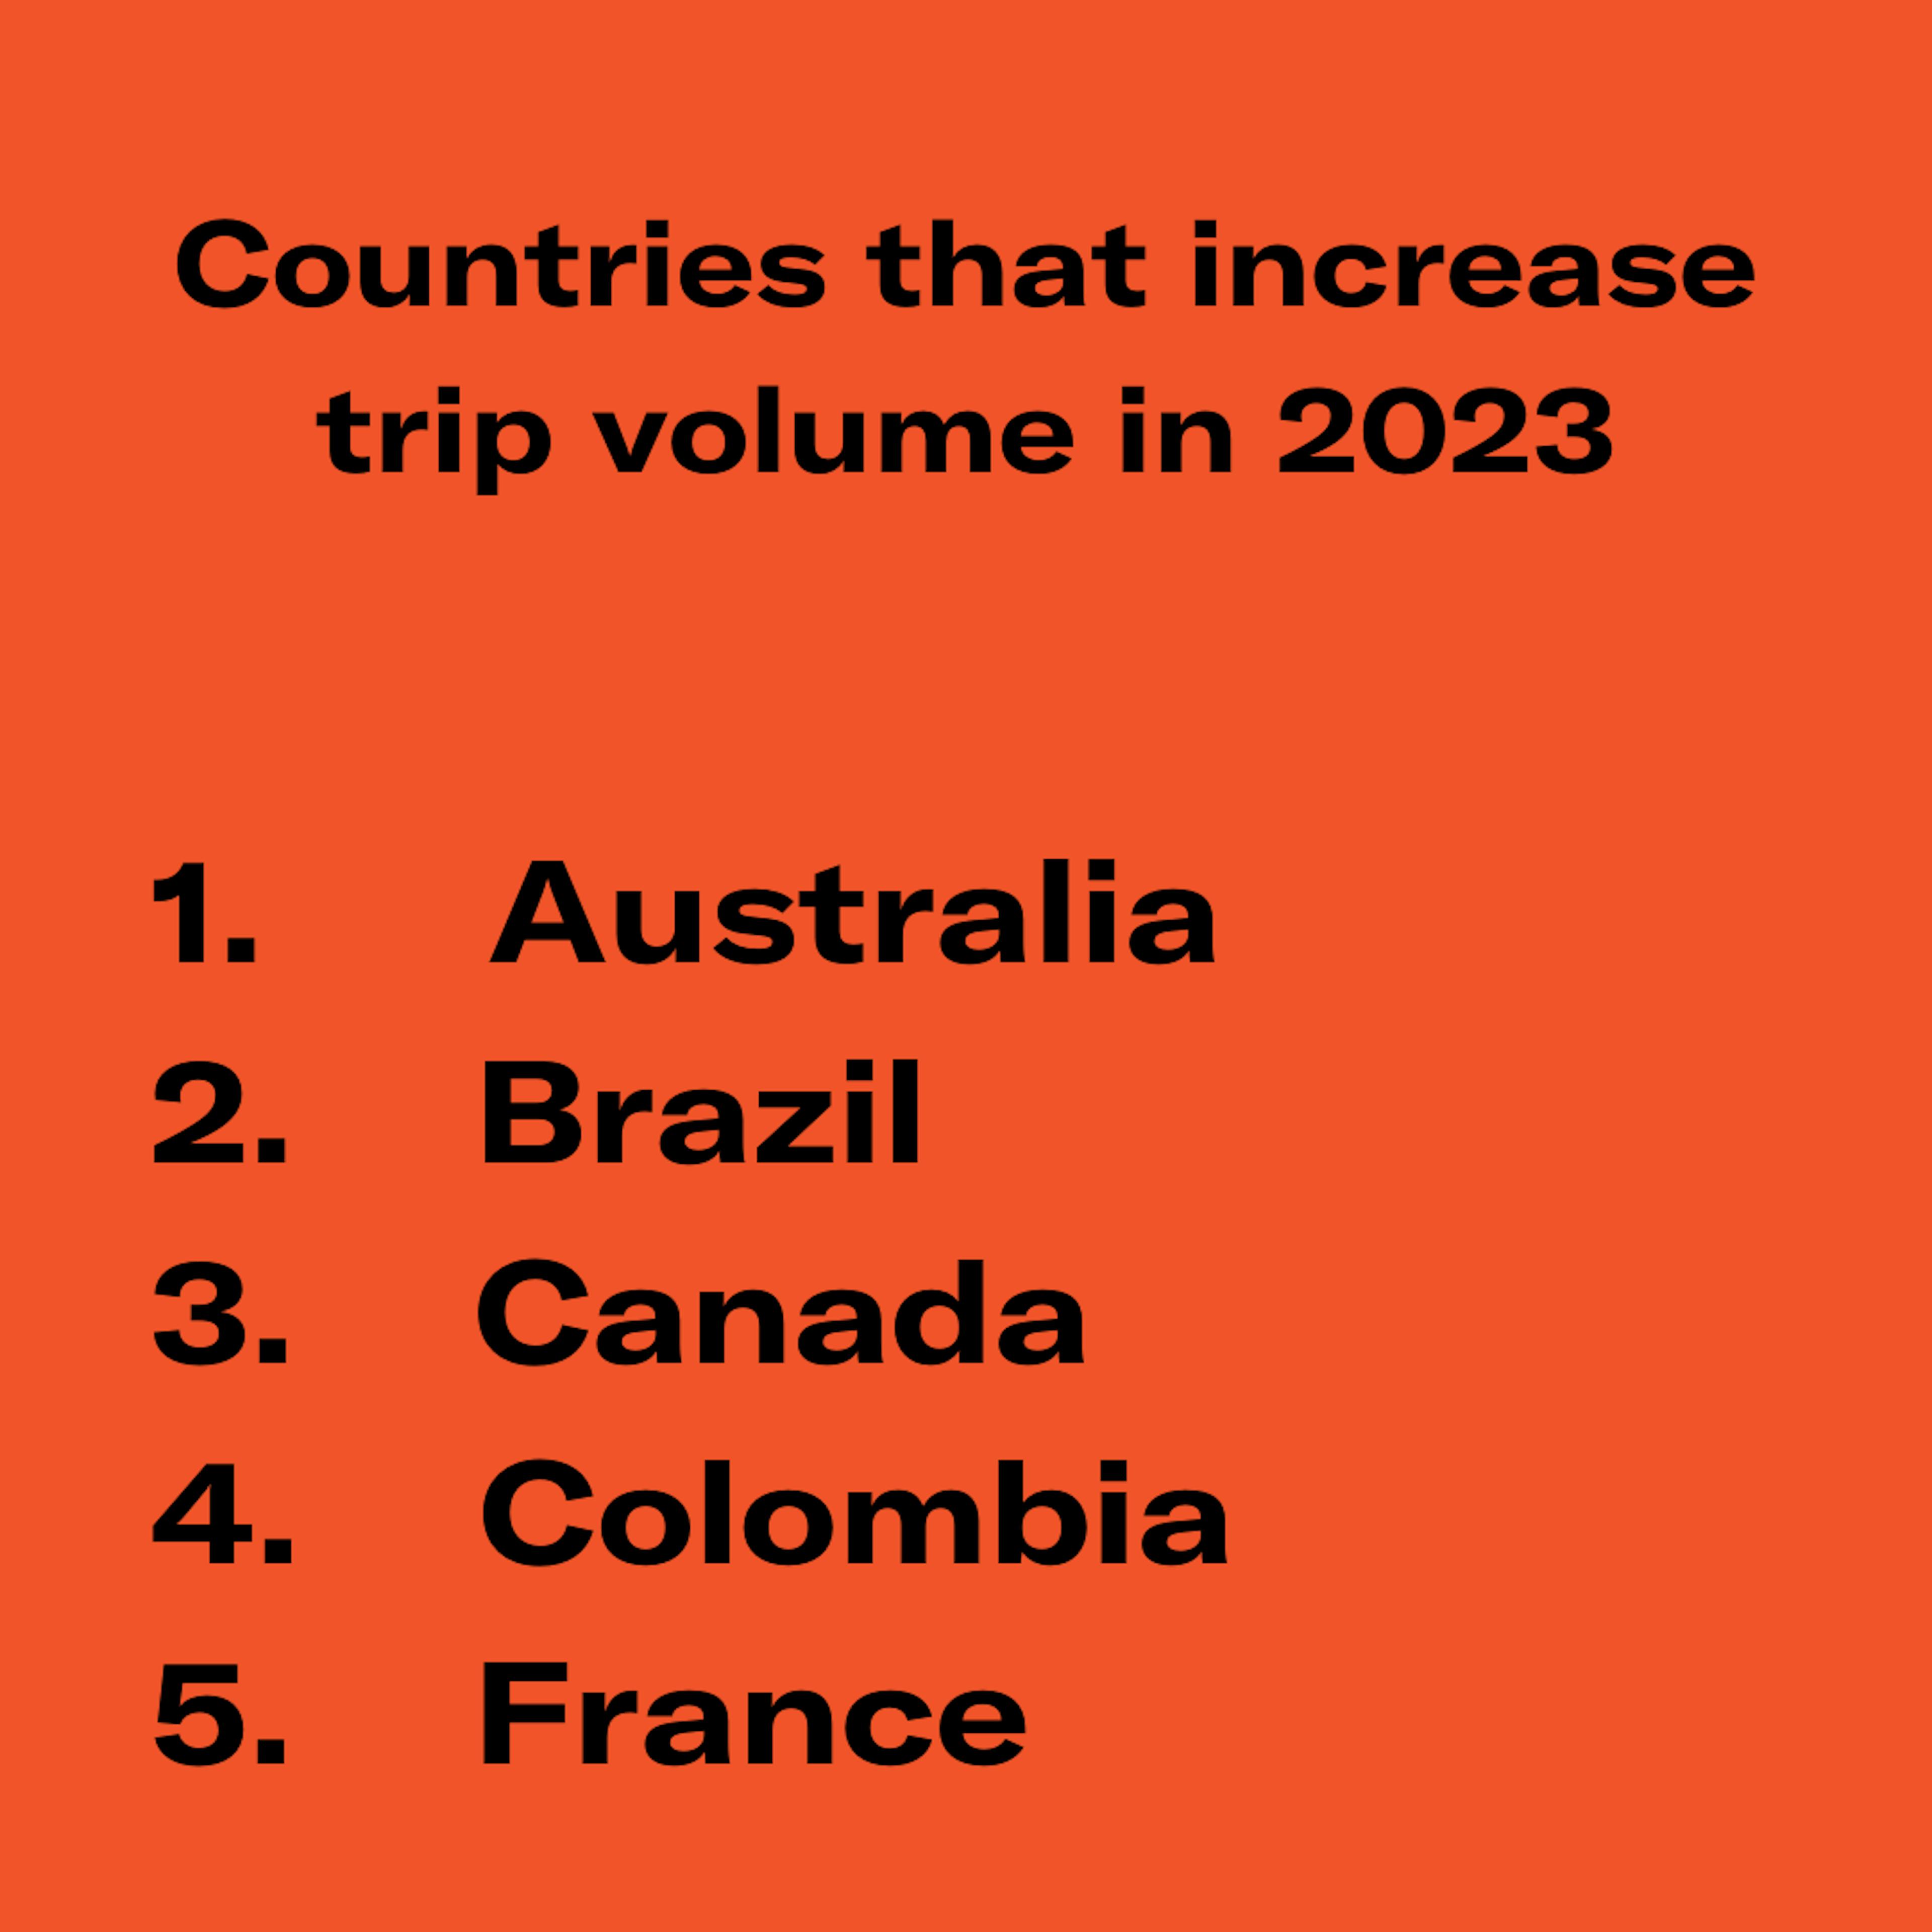 Austrialia, Brazil, Canada, Colombia, France, Japan, Netherlands, South Korea, & the UK reported increasing their number of trips internationally in 2023.